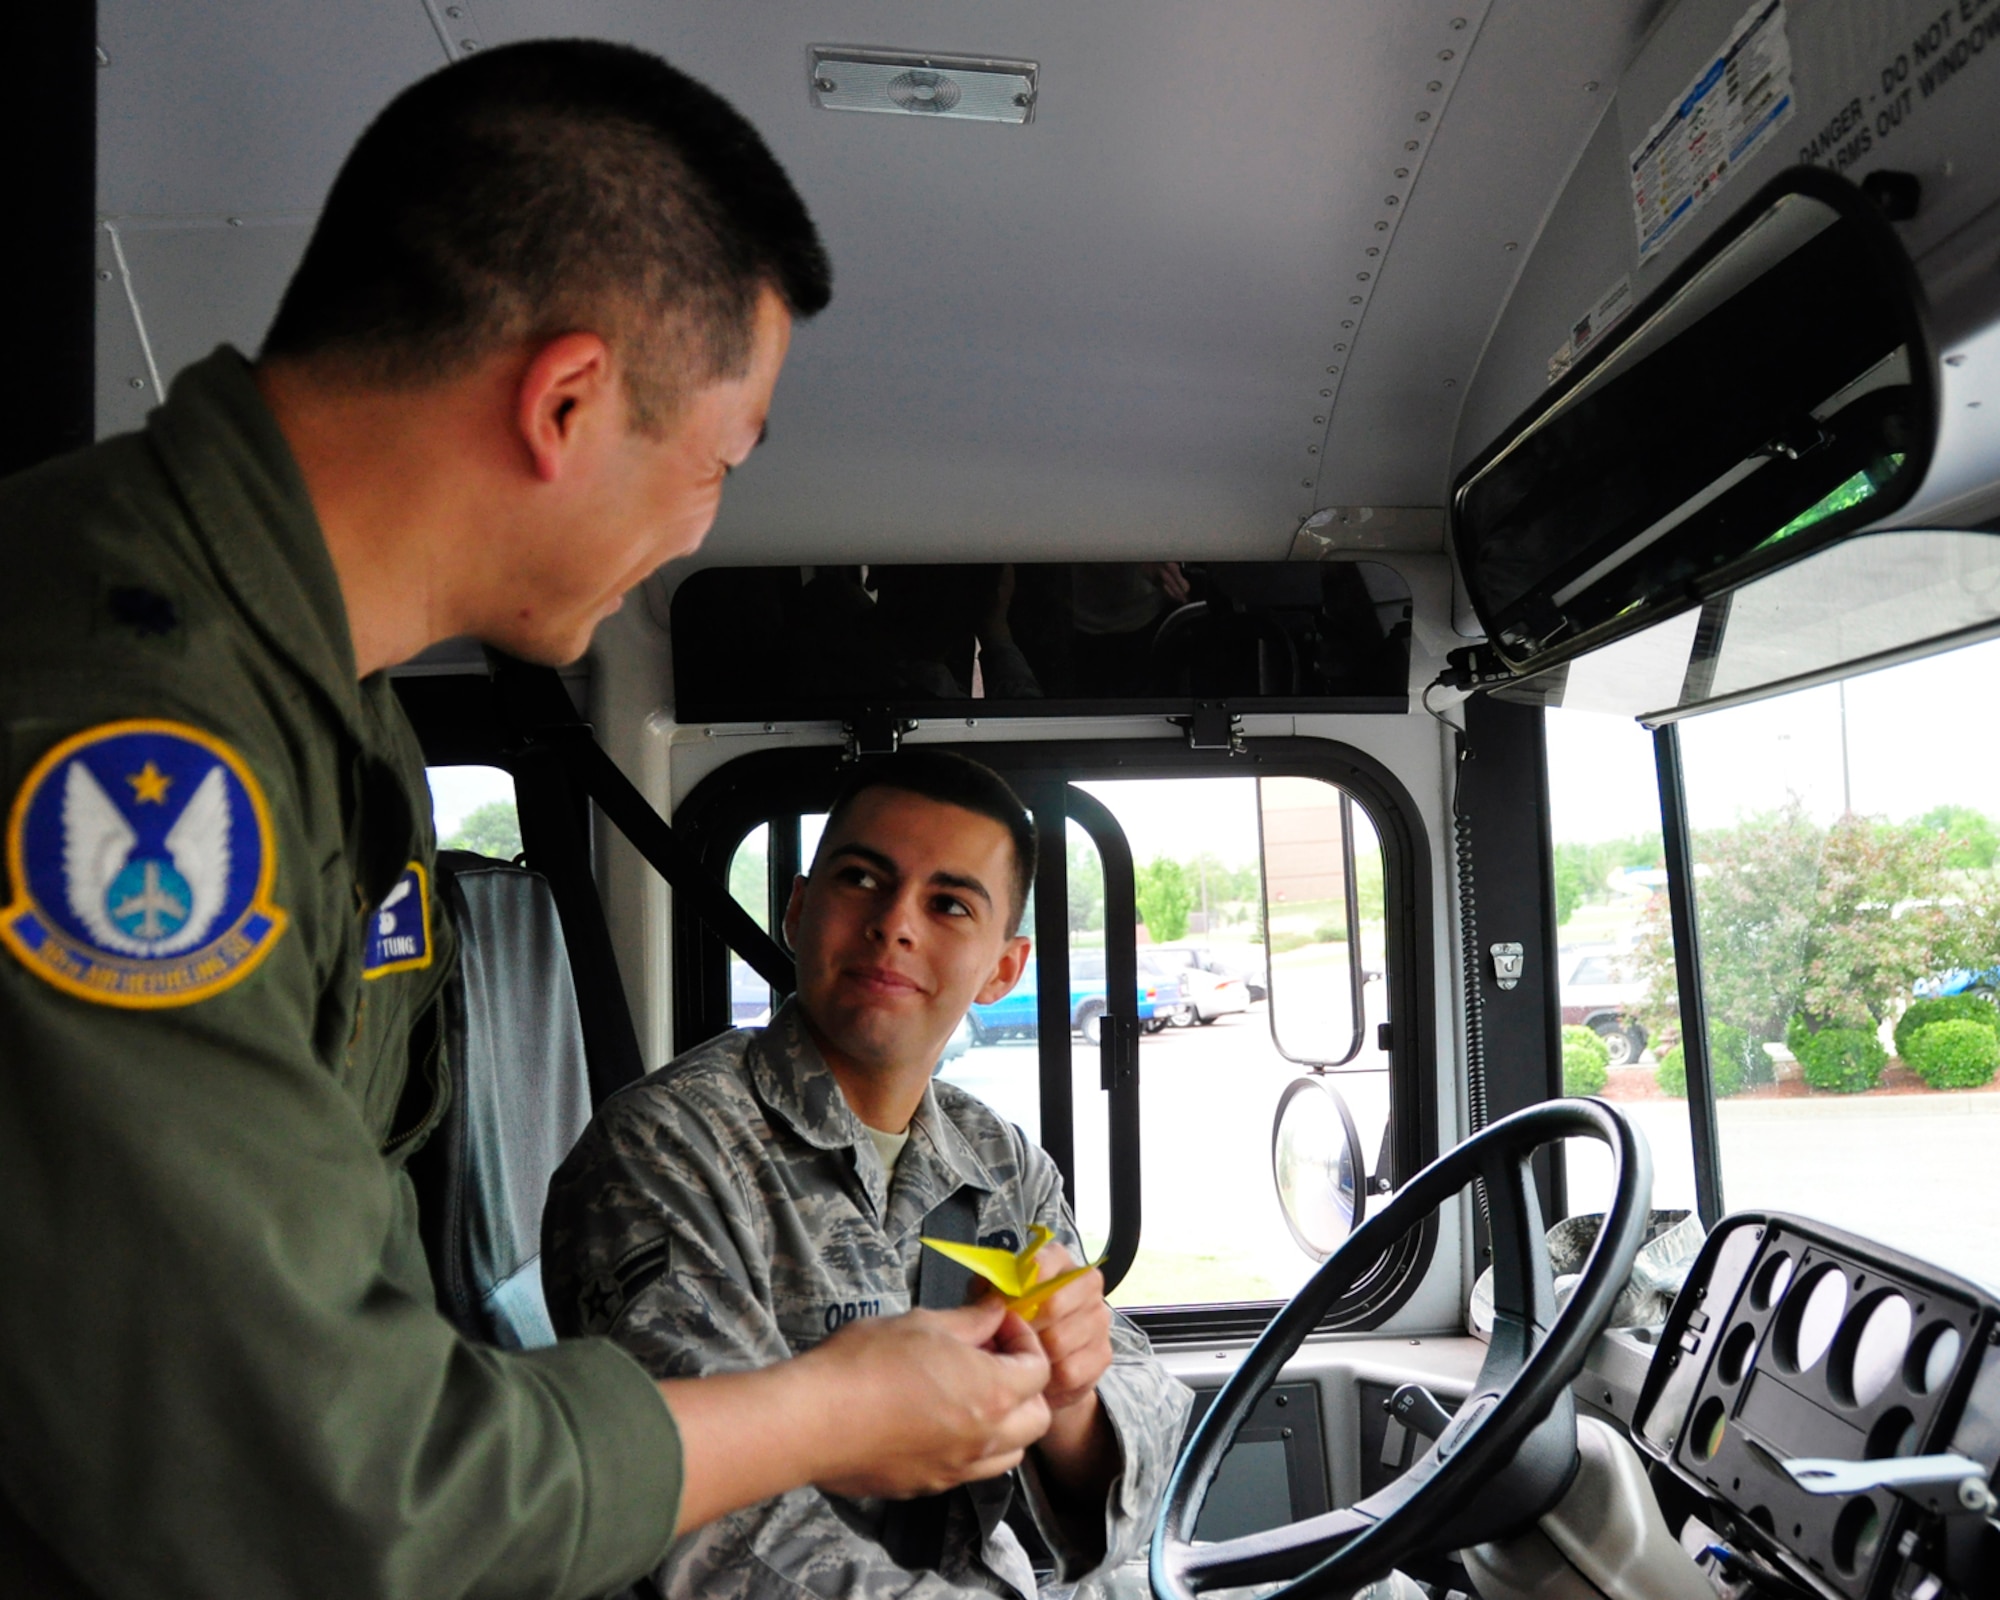 Lt. Col. Tsuyoshi "T" Tung gives an origami crane to Airman 1st Class Johnny Ortiz, an active-duty Airman assigned to the 22nd Logistics Readiness Squadron. Airman Ortiz drove a bus that delivered an 18th Air Refueling Squadron aircrew to a KC-135 Stratotanker at McConnell Air Force Base, Kan., for what Colonel Tung declared as an Asian-Pacific American Heritage Sortie. Giving origami is a custom in Japan, where Colonel Tung was born. He is a KC-135 pilot assigned to the 18th ARS, the Reserve flying unit of the 931st Air Refueling Group. (Courtesy photo/Capt. Jon Murphy)